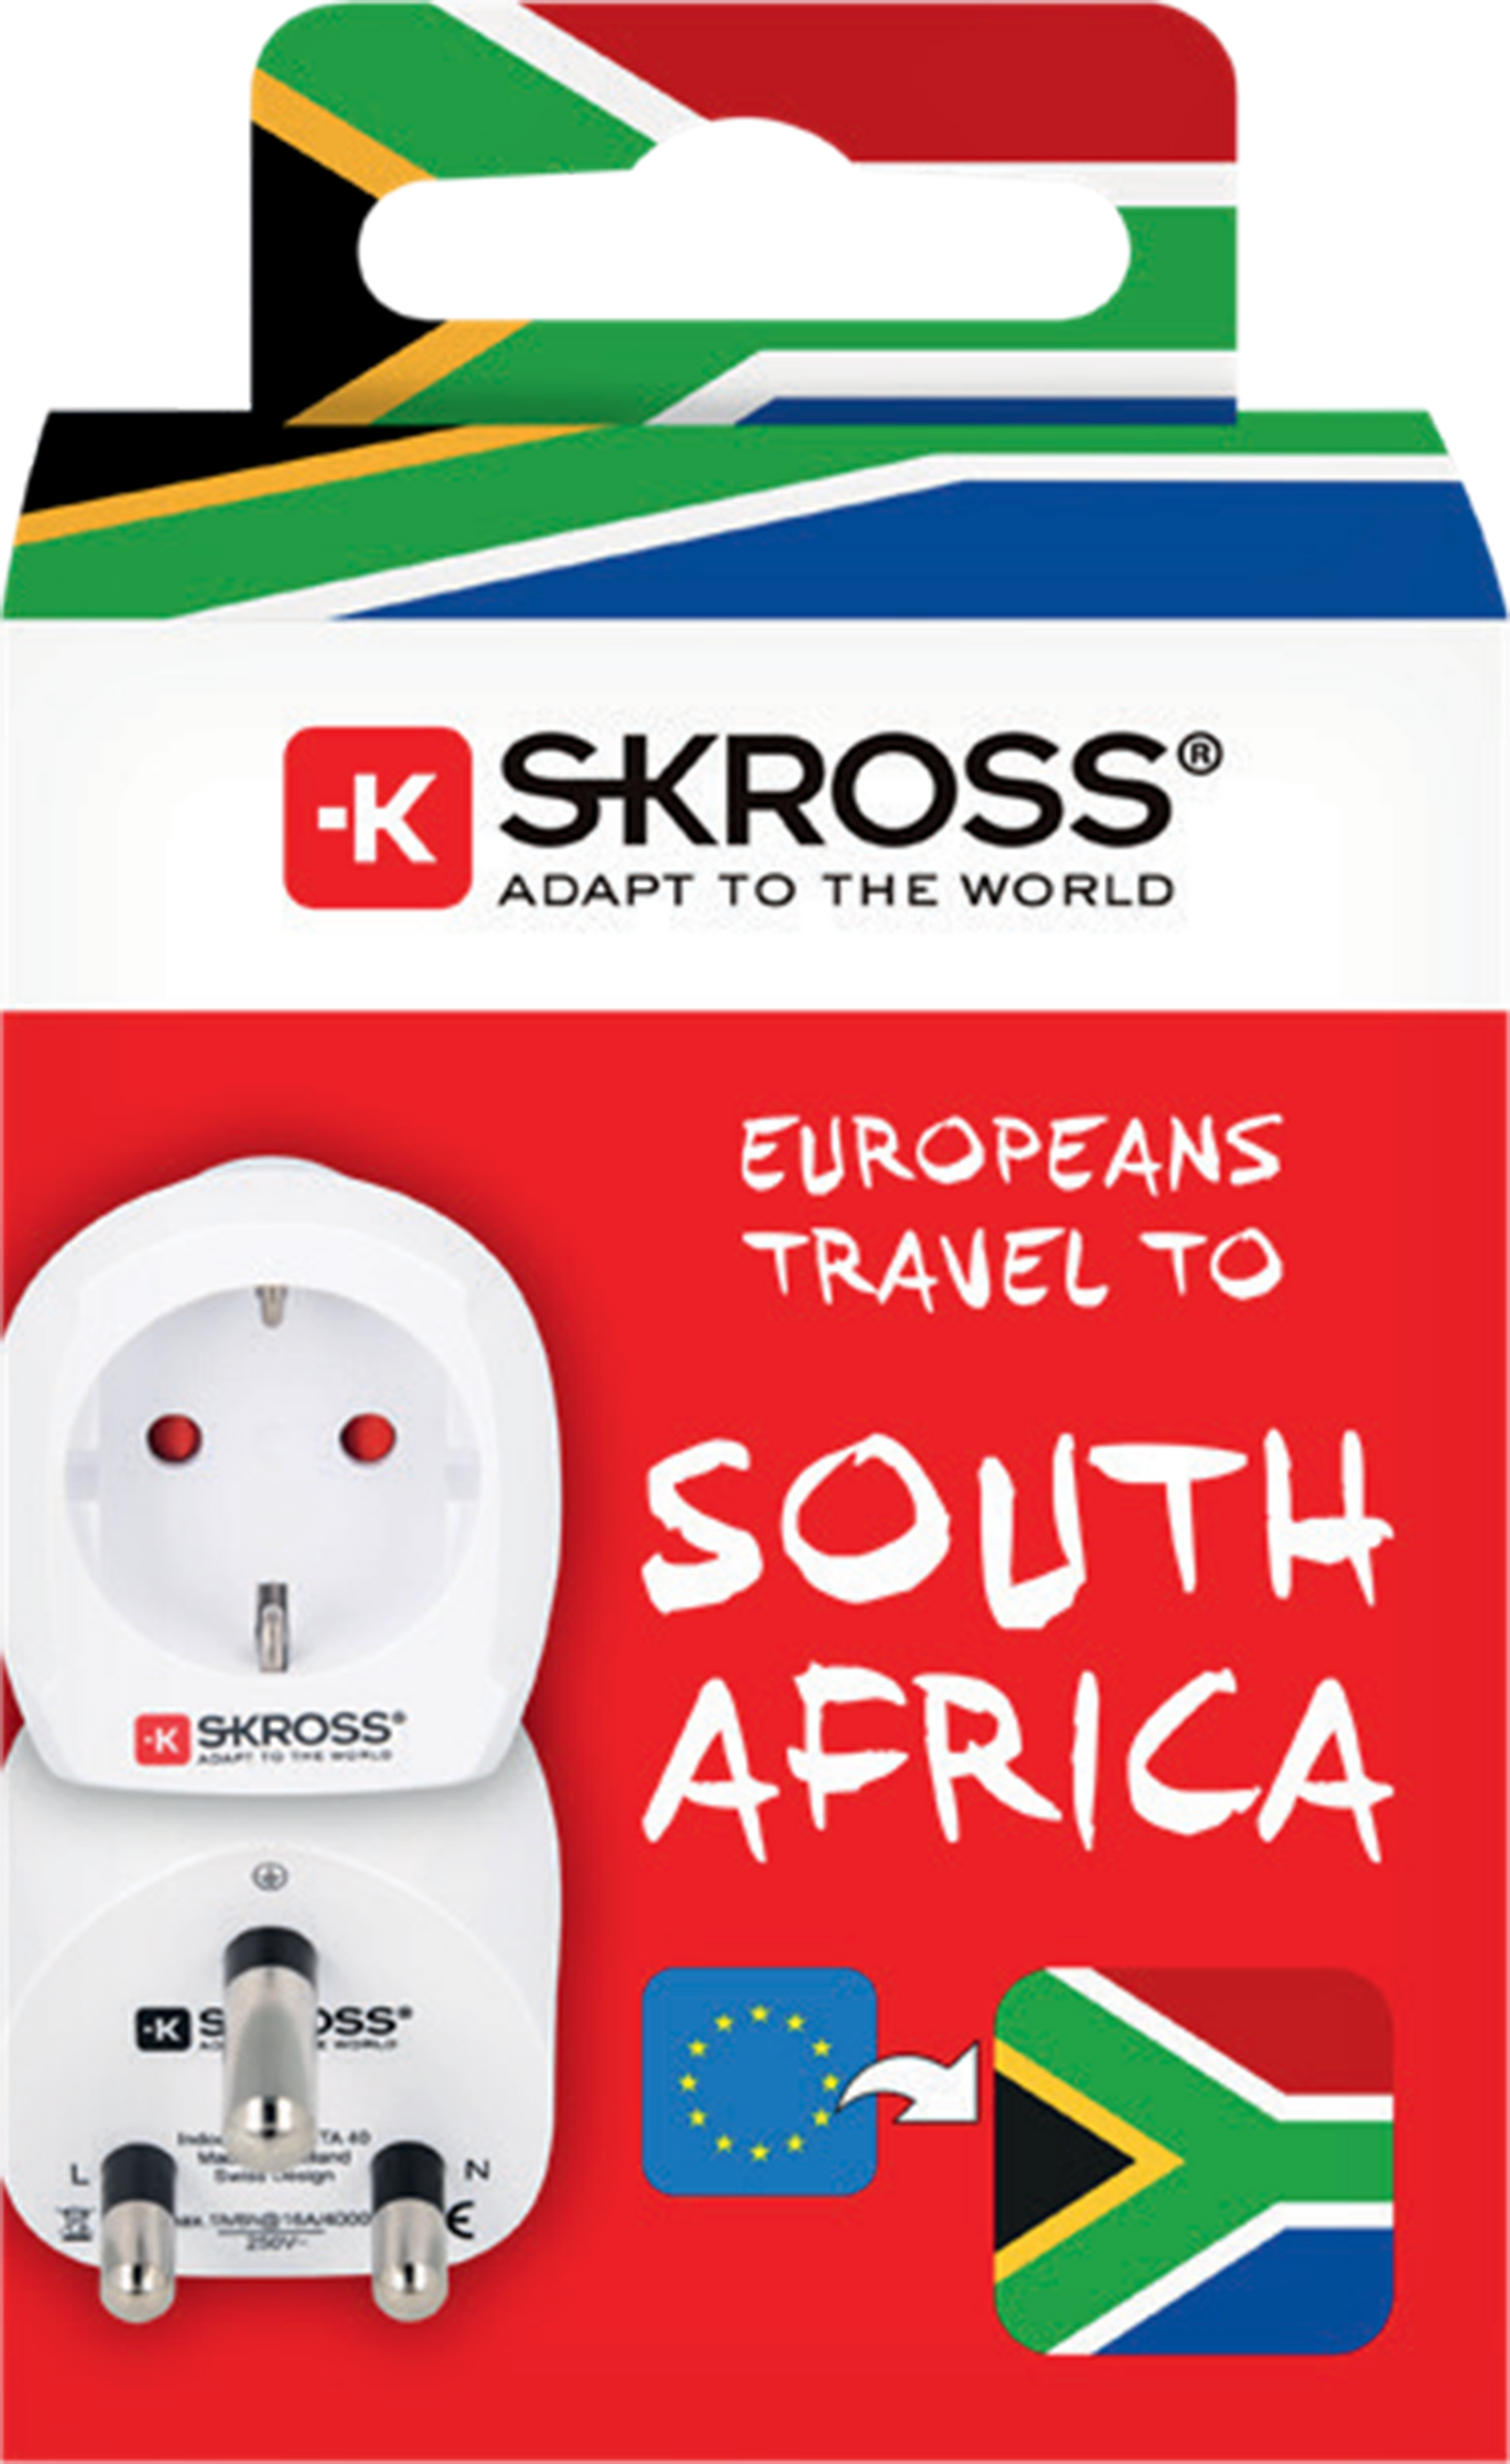 Skross 3-Pole Europe to South Africa Travel Adapter Packaging